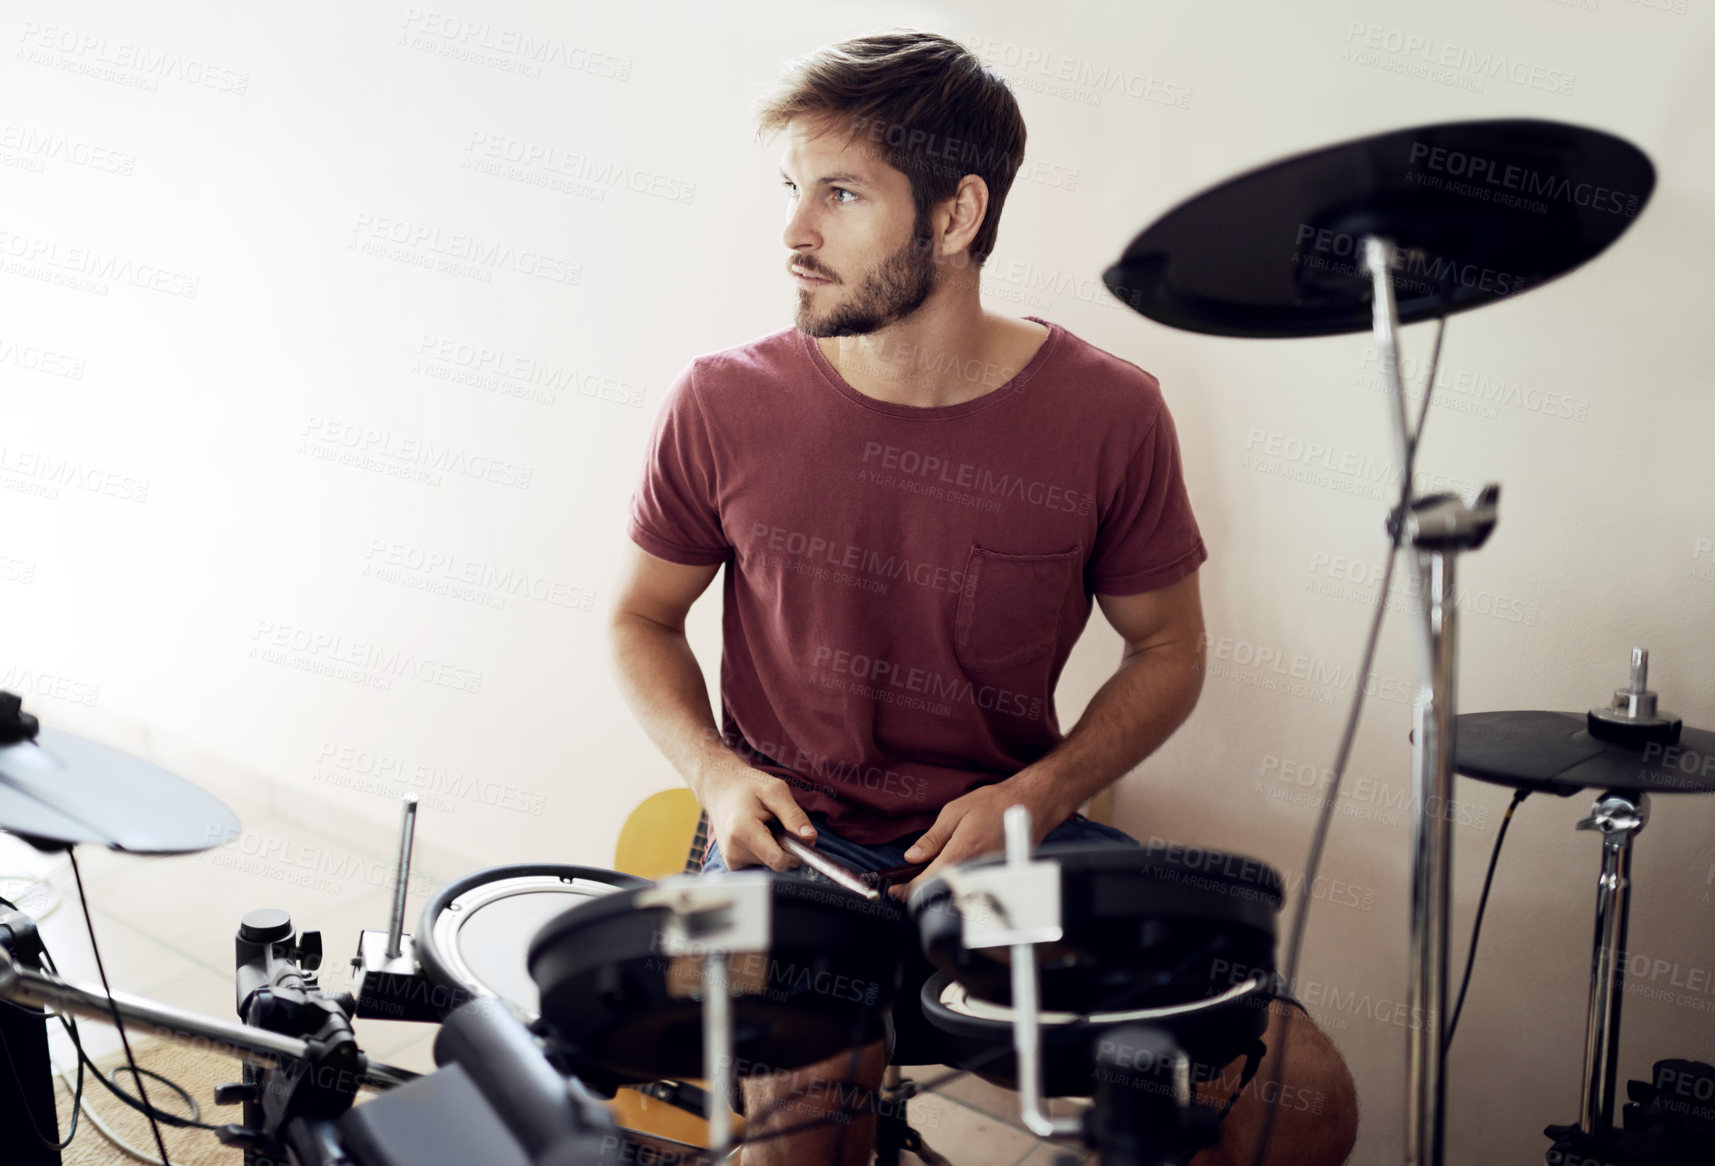 Buy stock photo Drummer, man and music with percussion drums on stage, rhythm and talent with band. Creative person, practice and performing as artist or professional musician and audio entertainment on instrument